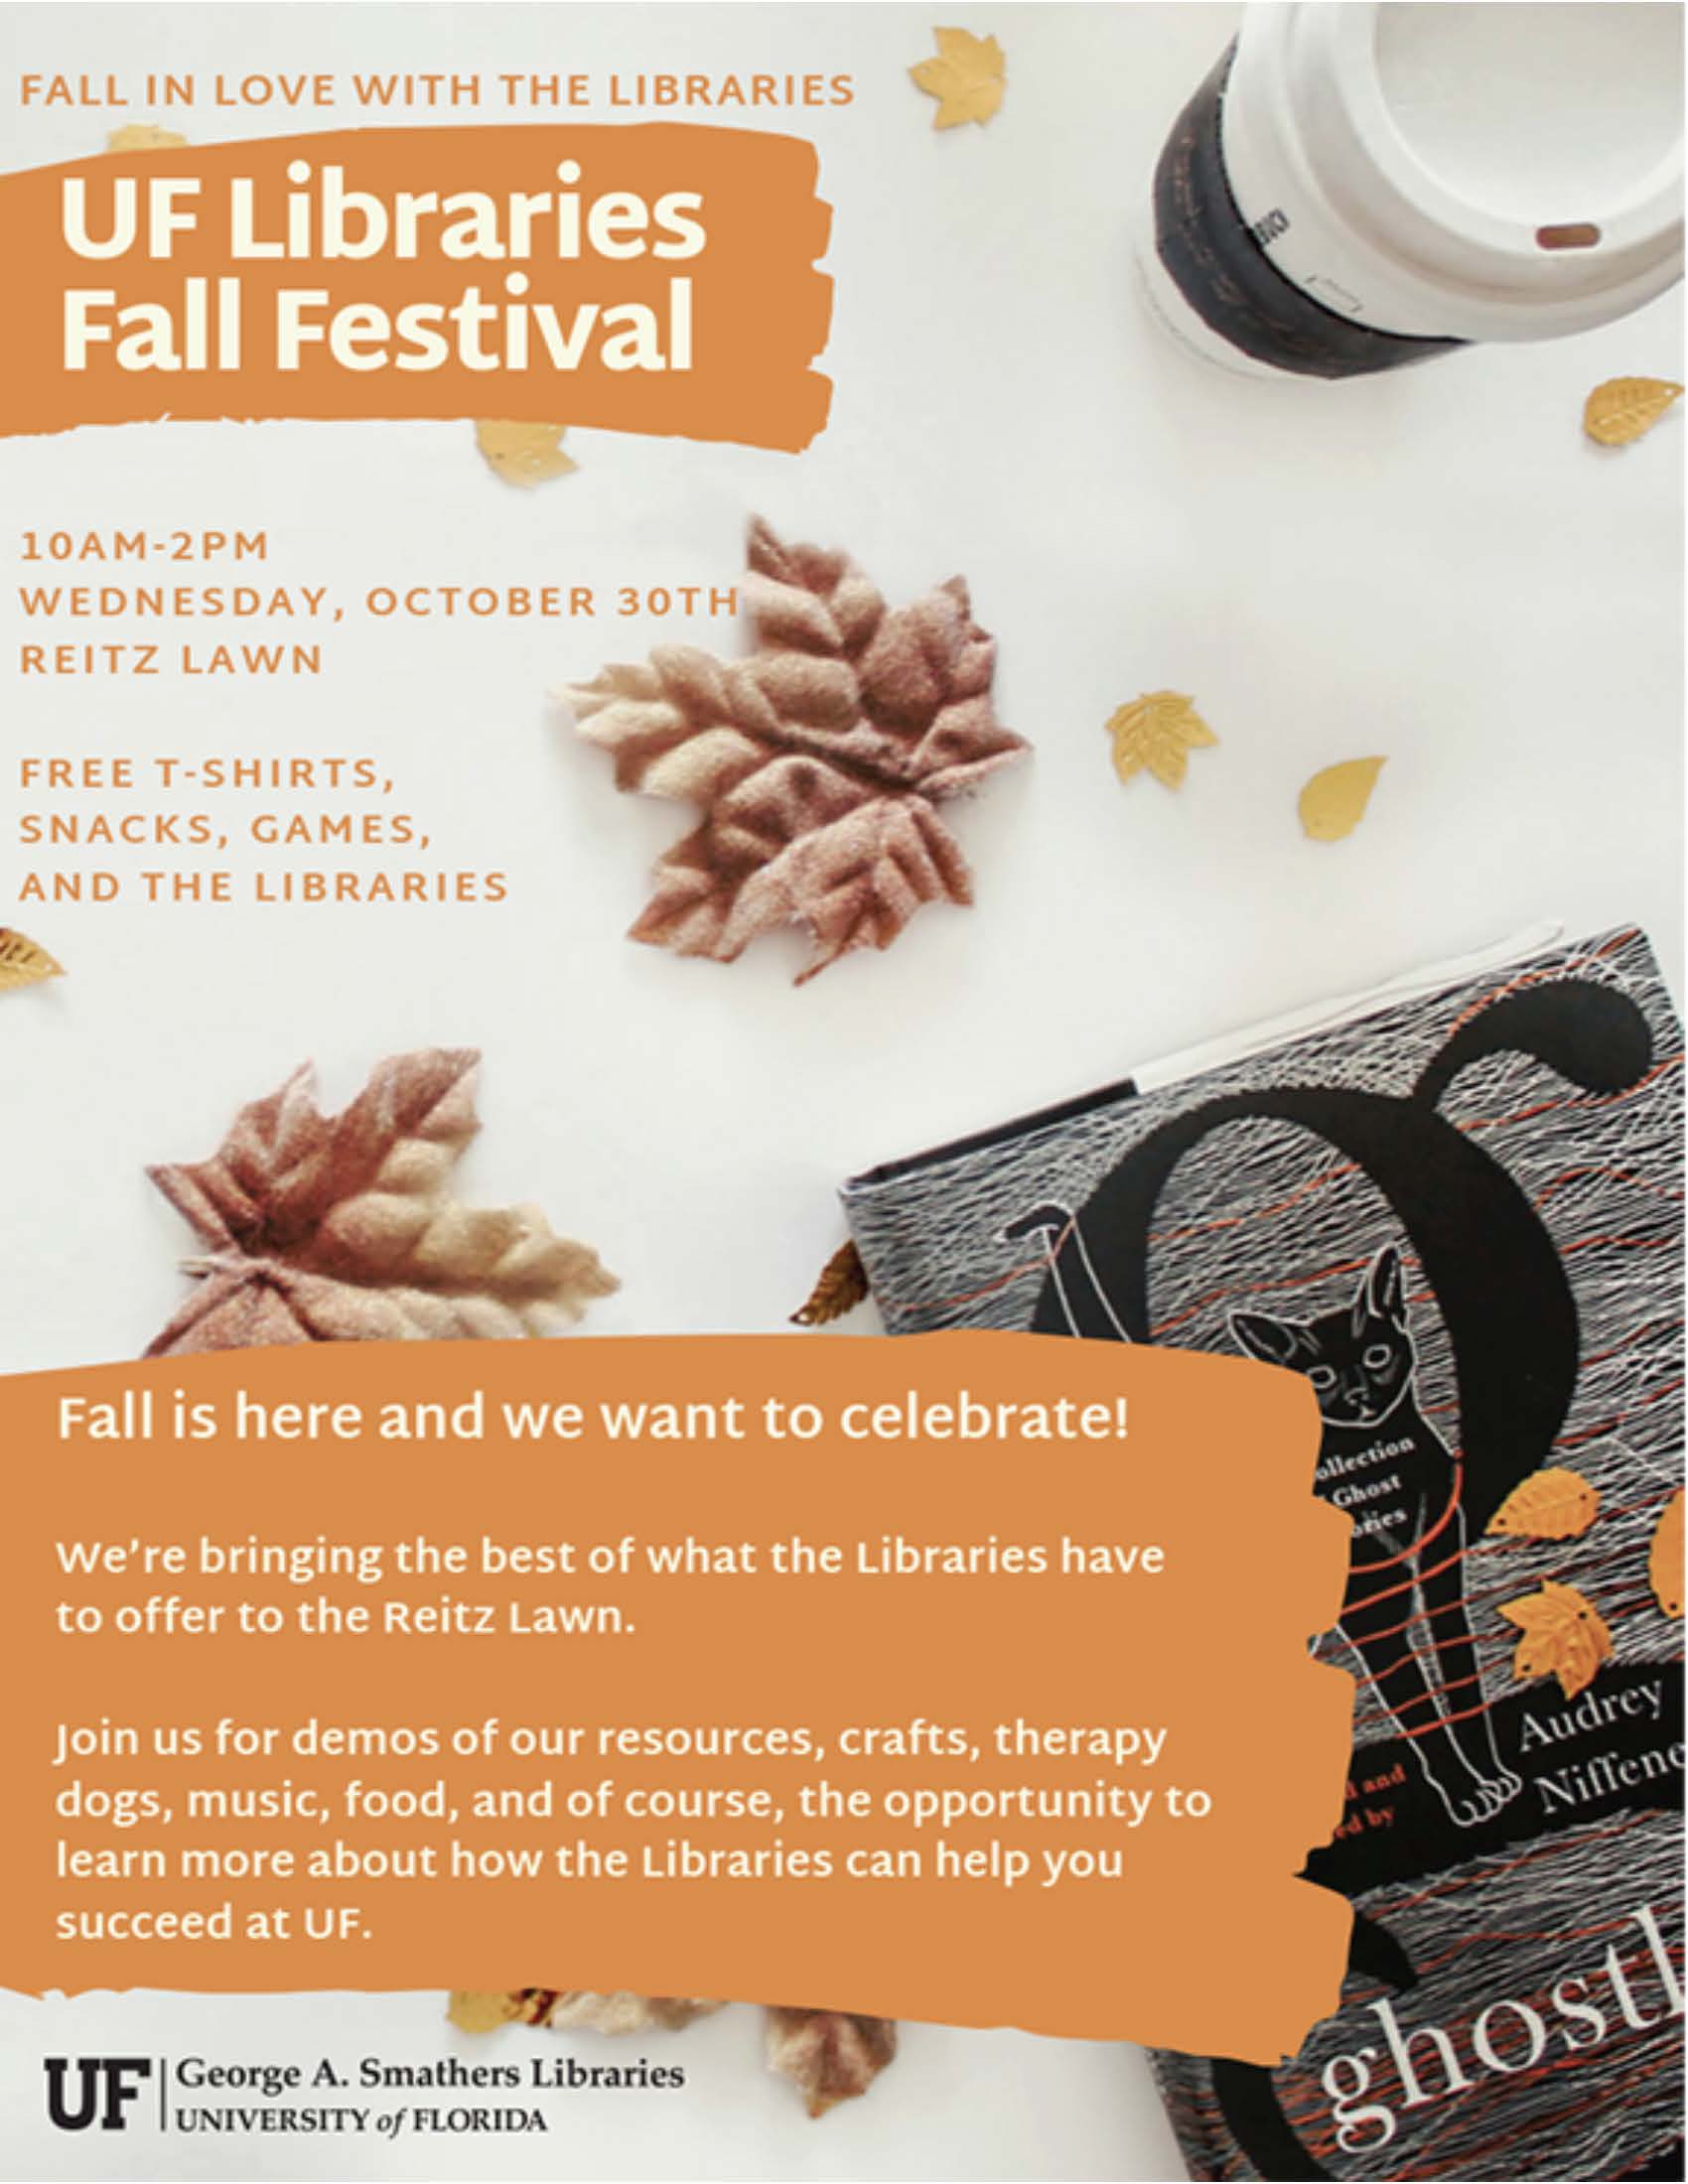 UF Libraries Fall Festival Student Services